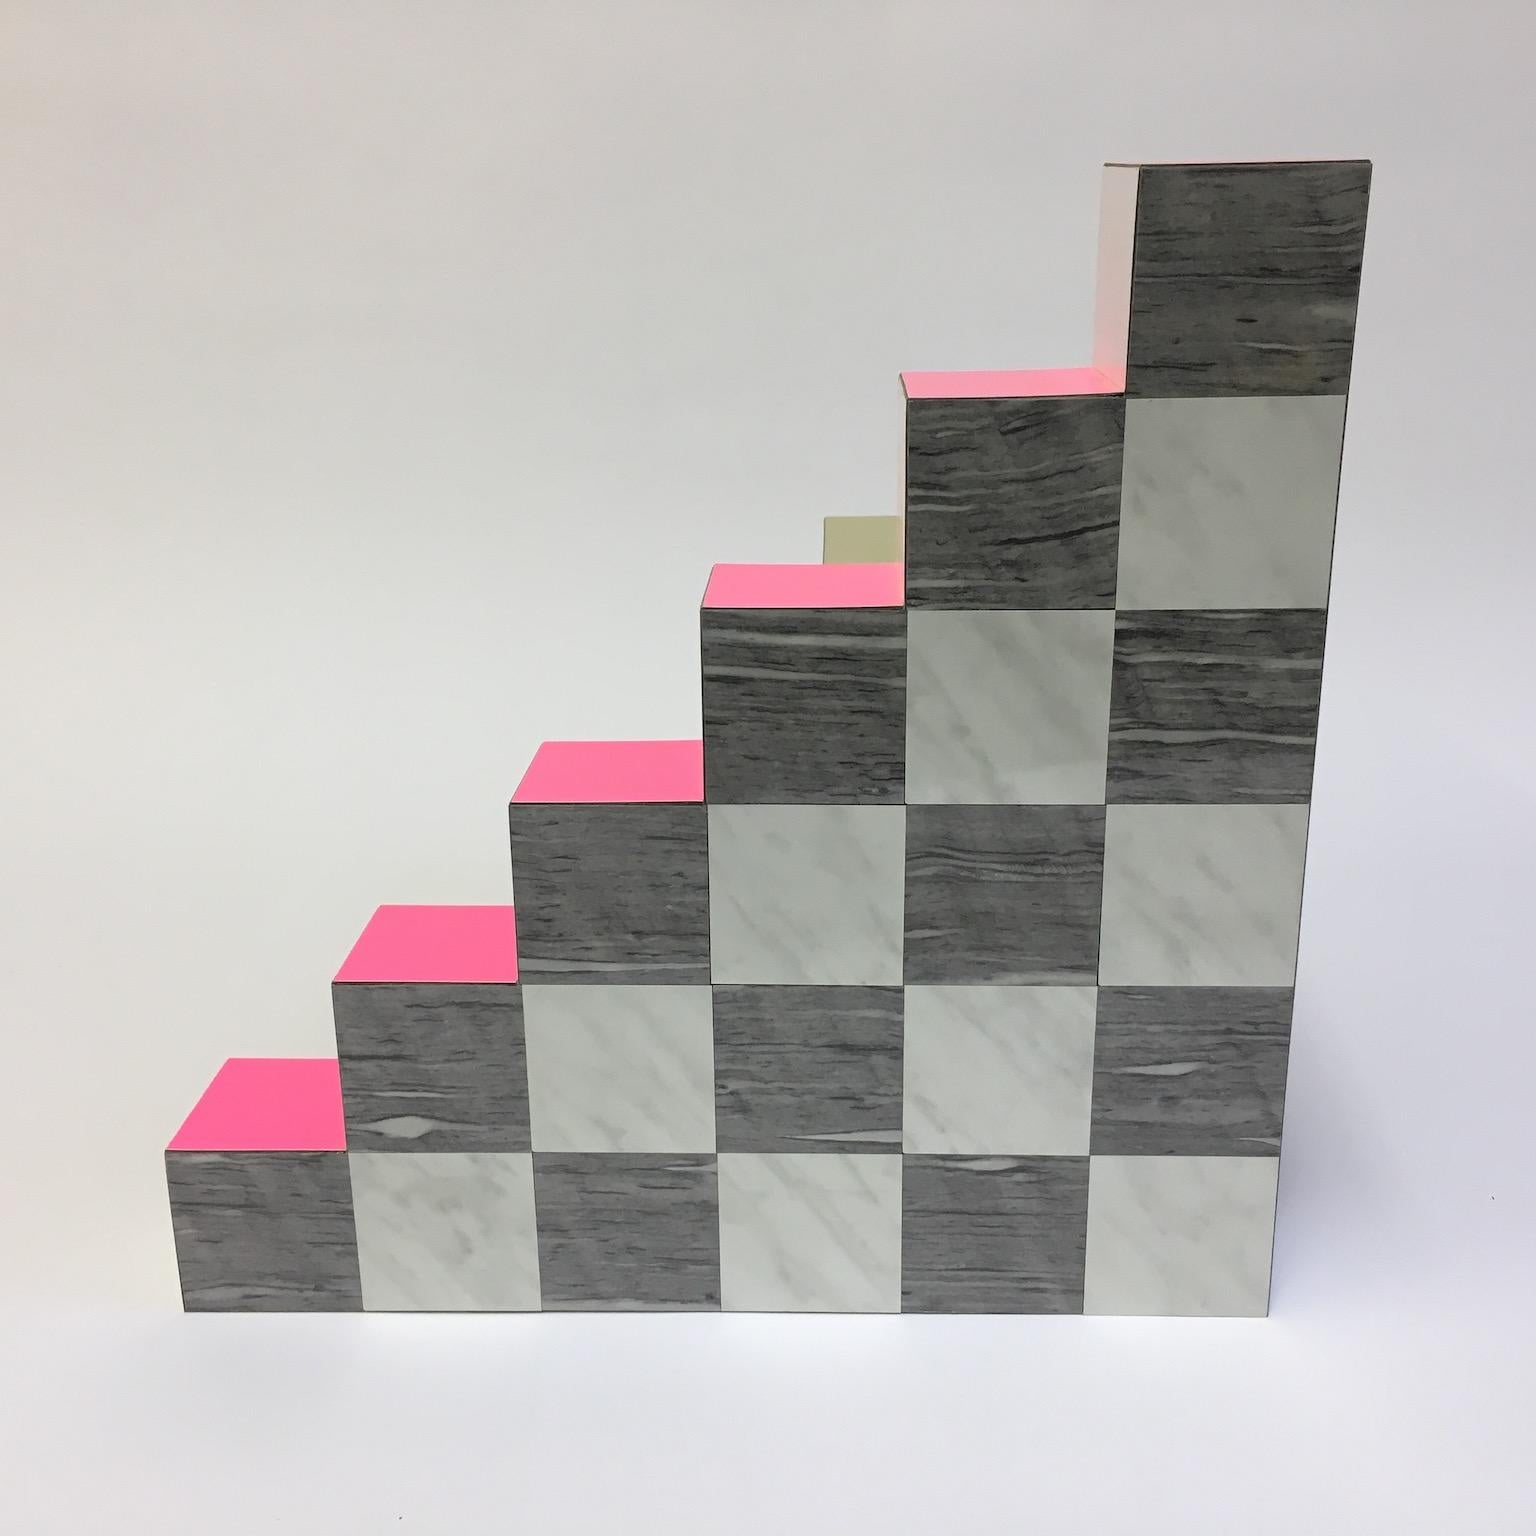 The Ziggurat series (of four) are smaller scale investigations into color, planes and form. Each Ziggurat as a unique, one-off sculpture, completely handmade and finished by Russell Bamber. The chequerboard ziggurat side panel is inspired by marble